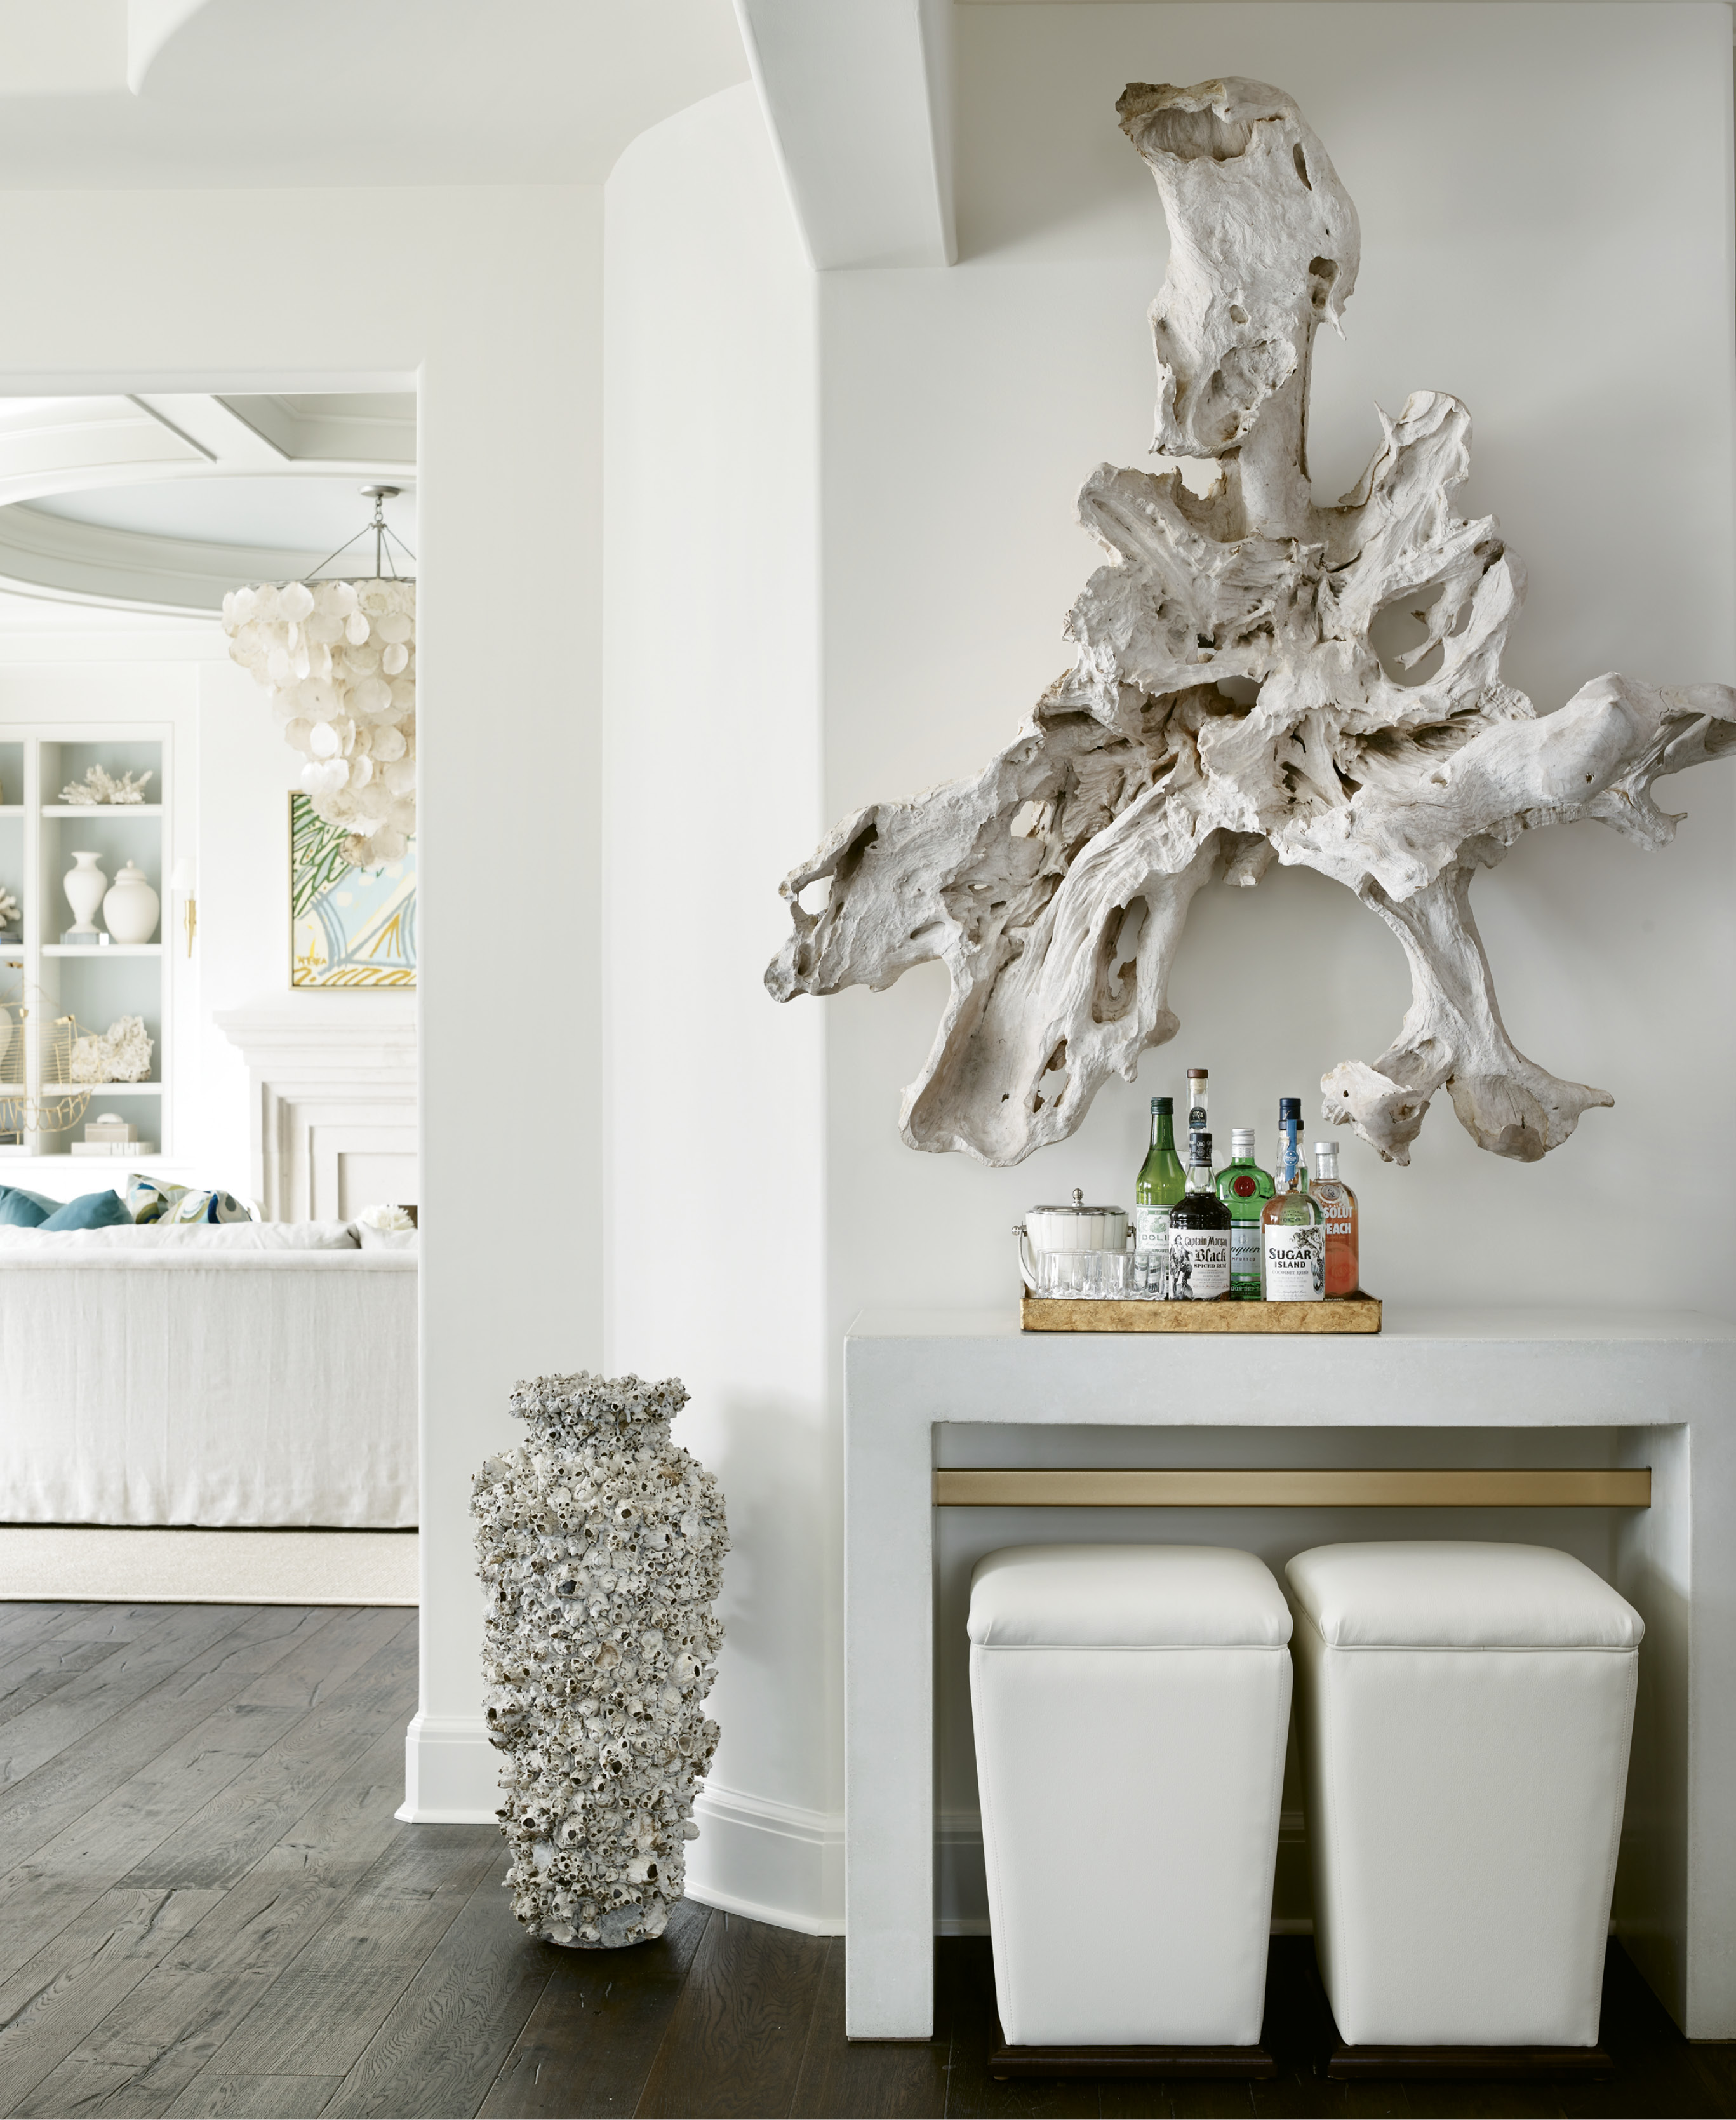 Though the decor isn’t overwhelmingly “beachy,” there are nods to the coastal setting, like the piece of driftwood from Bali hung over a Bradley USA concrete console table and a capiz shell chandelier by Oly.